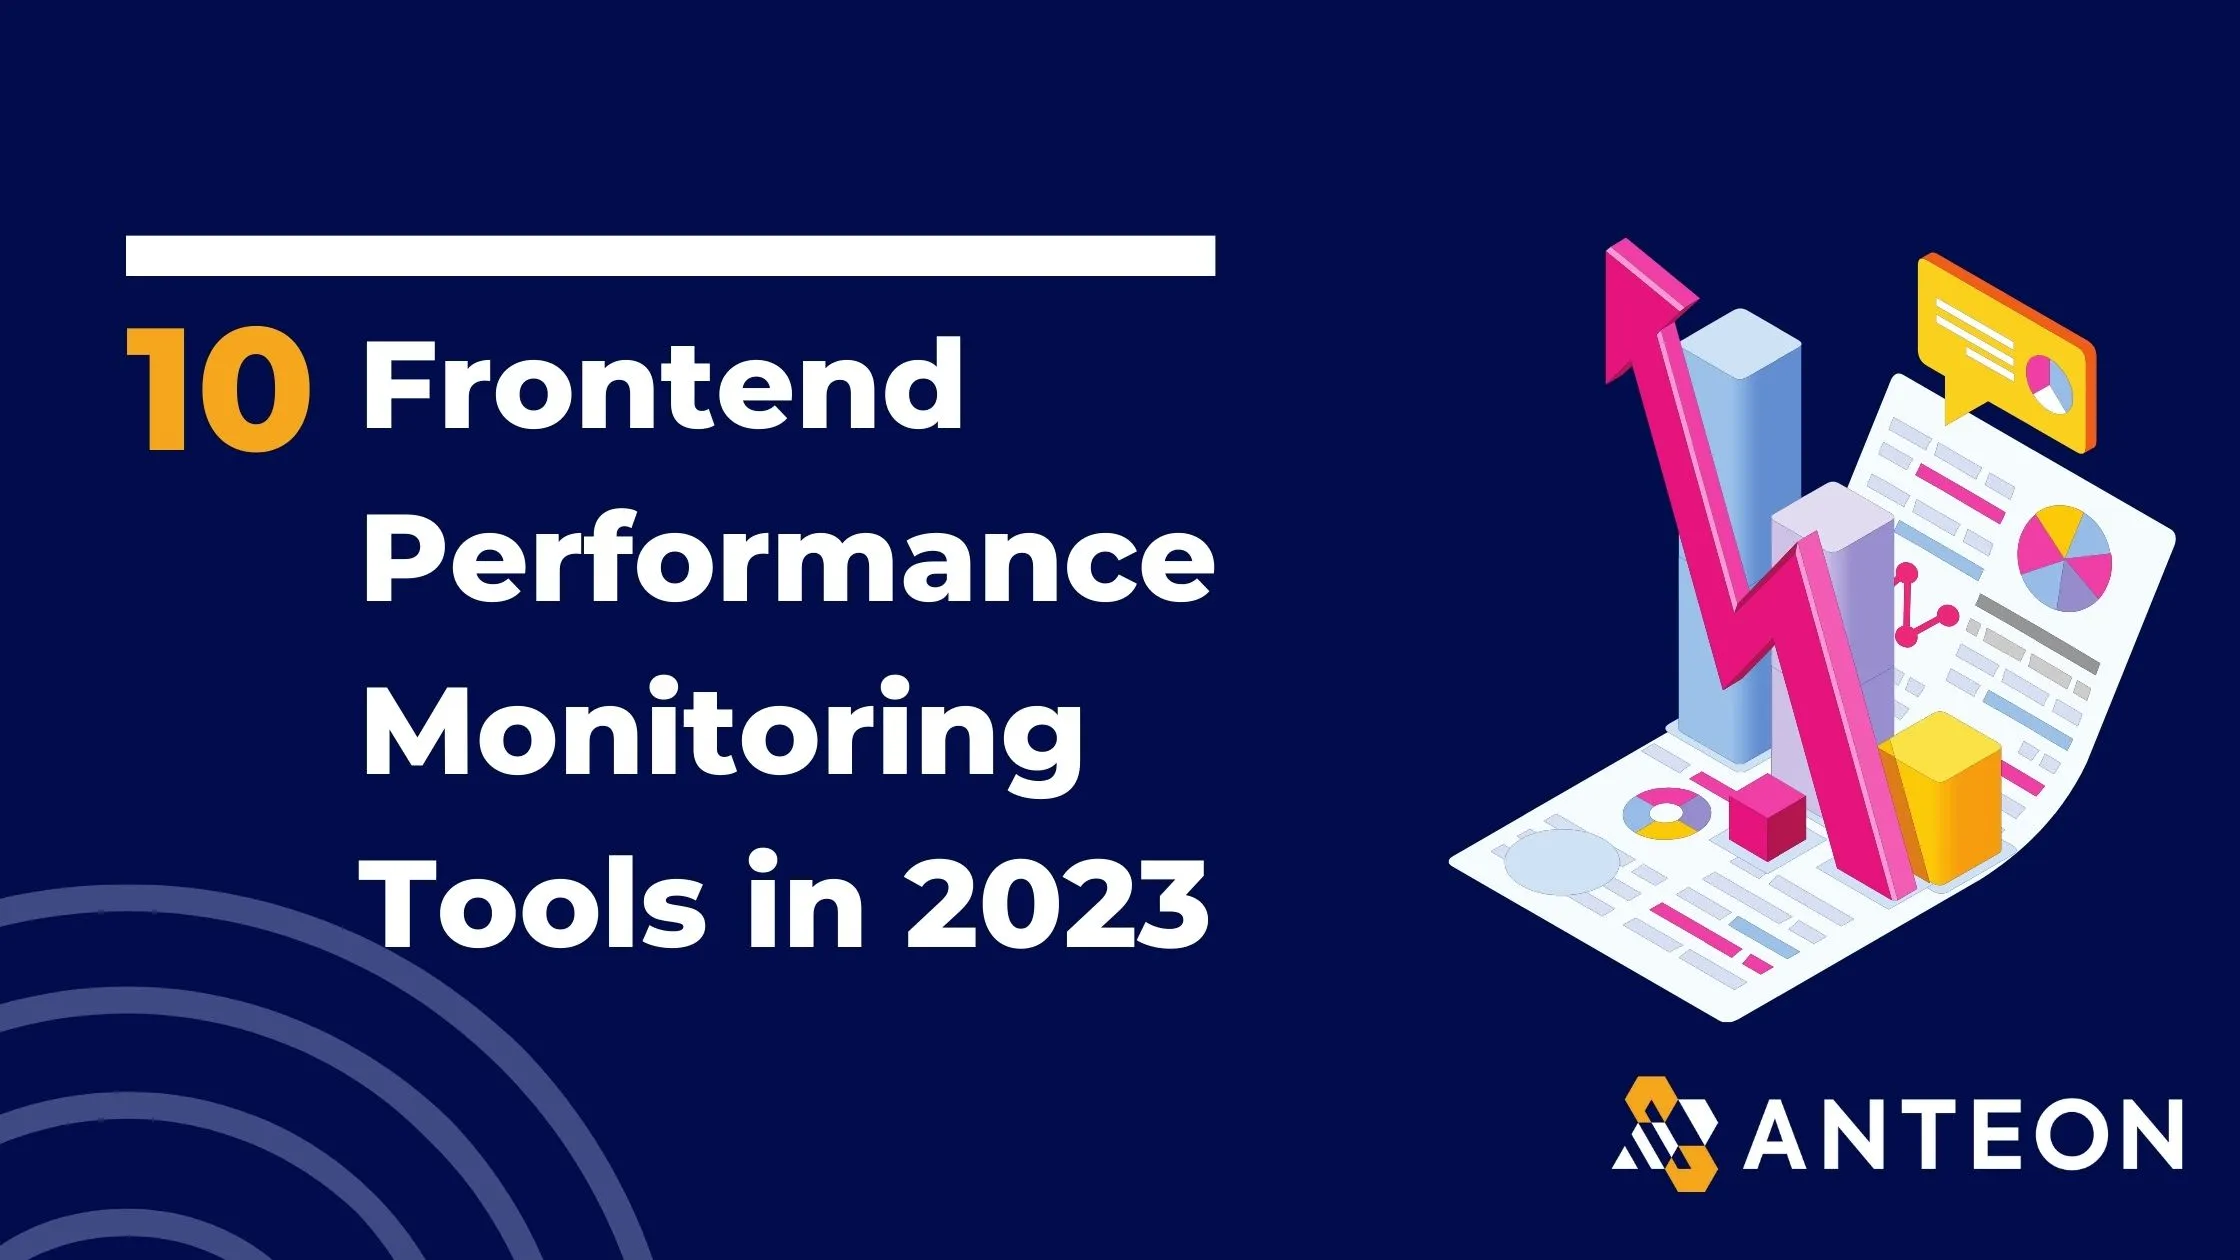 10 Frontend Performance Monitoring Tools in 2023